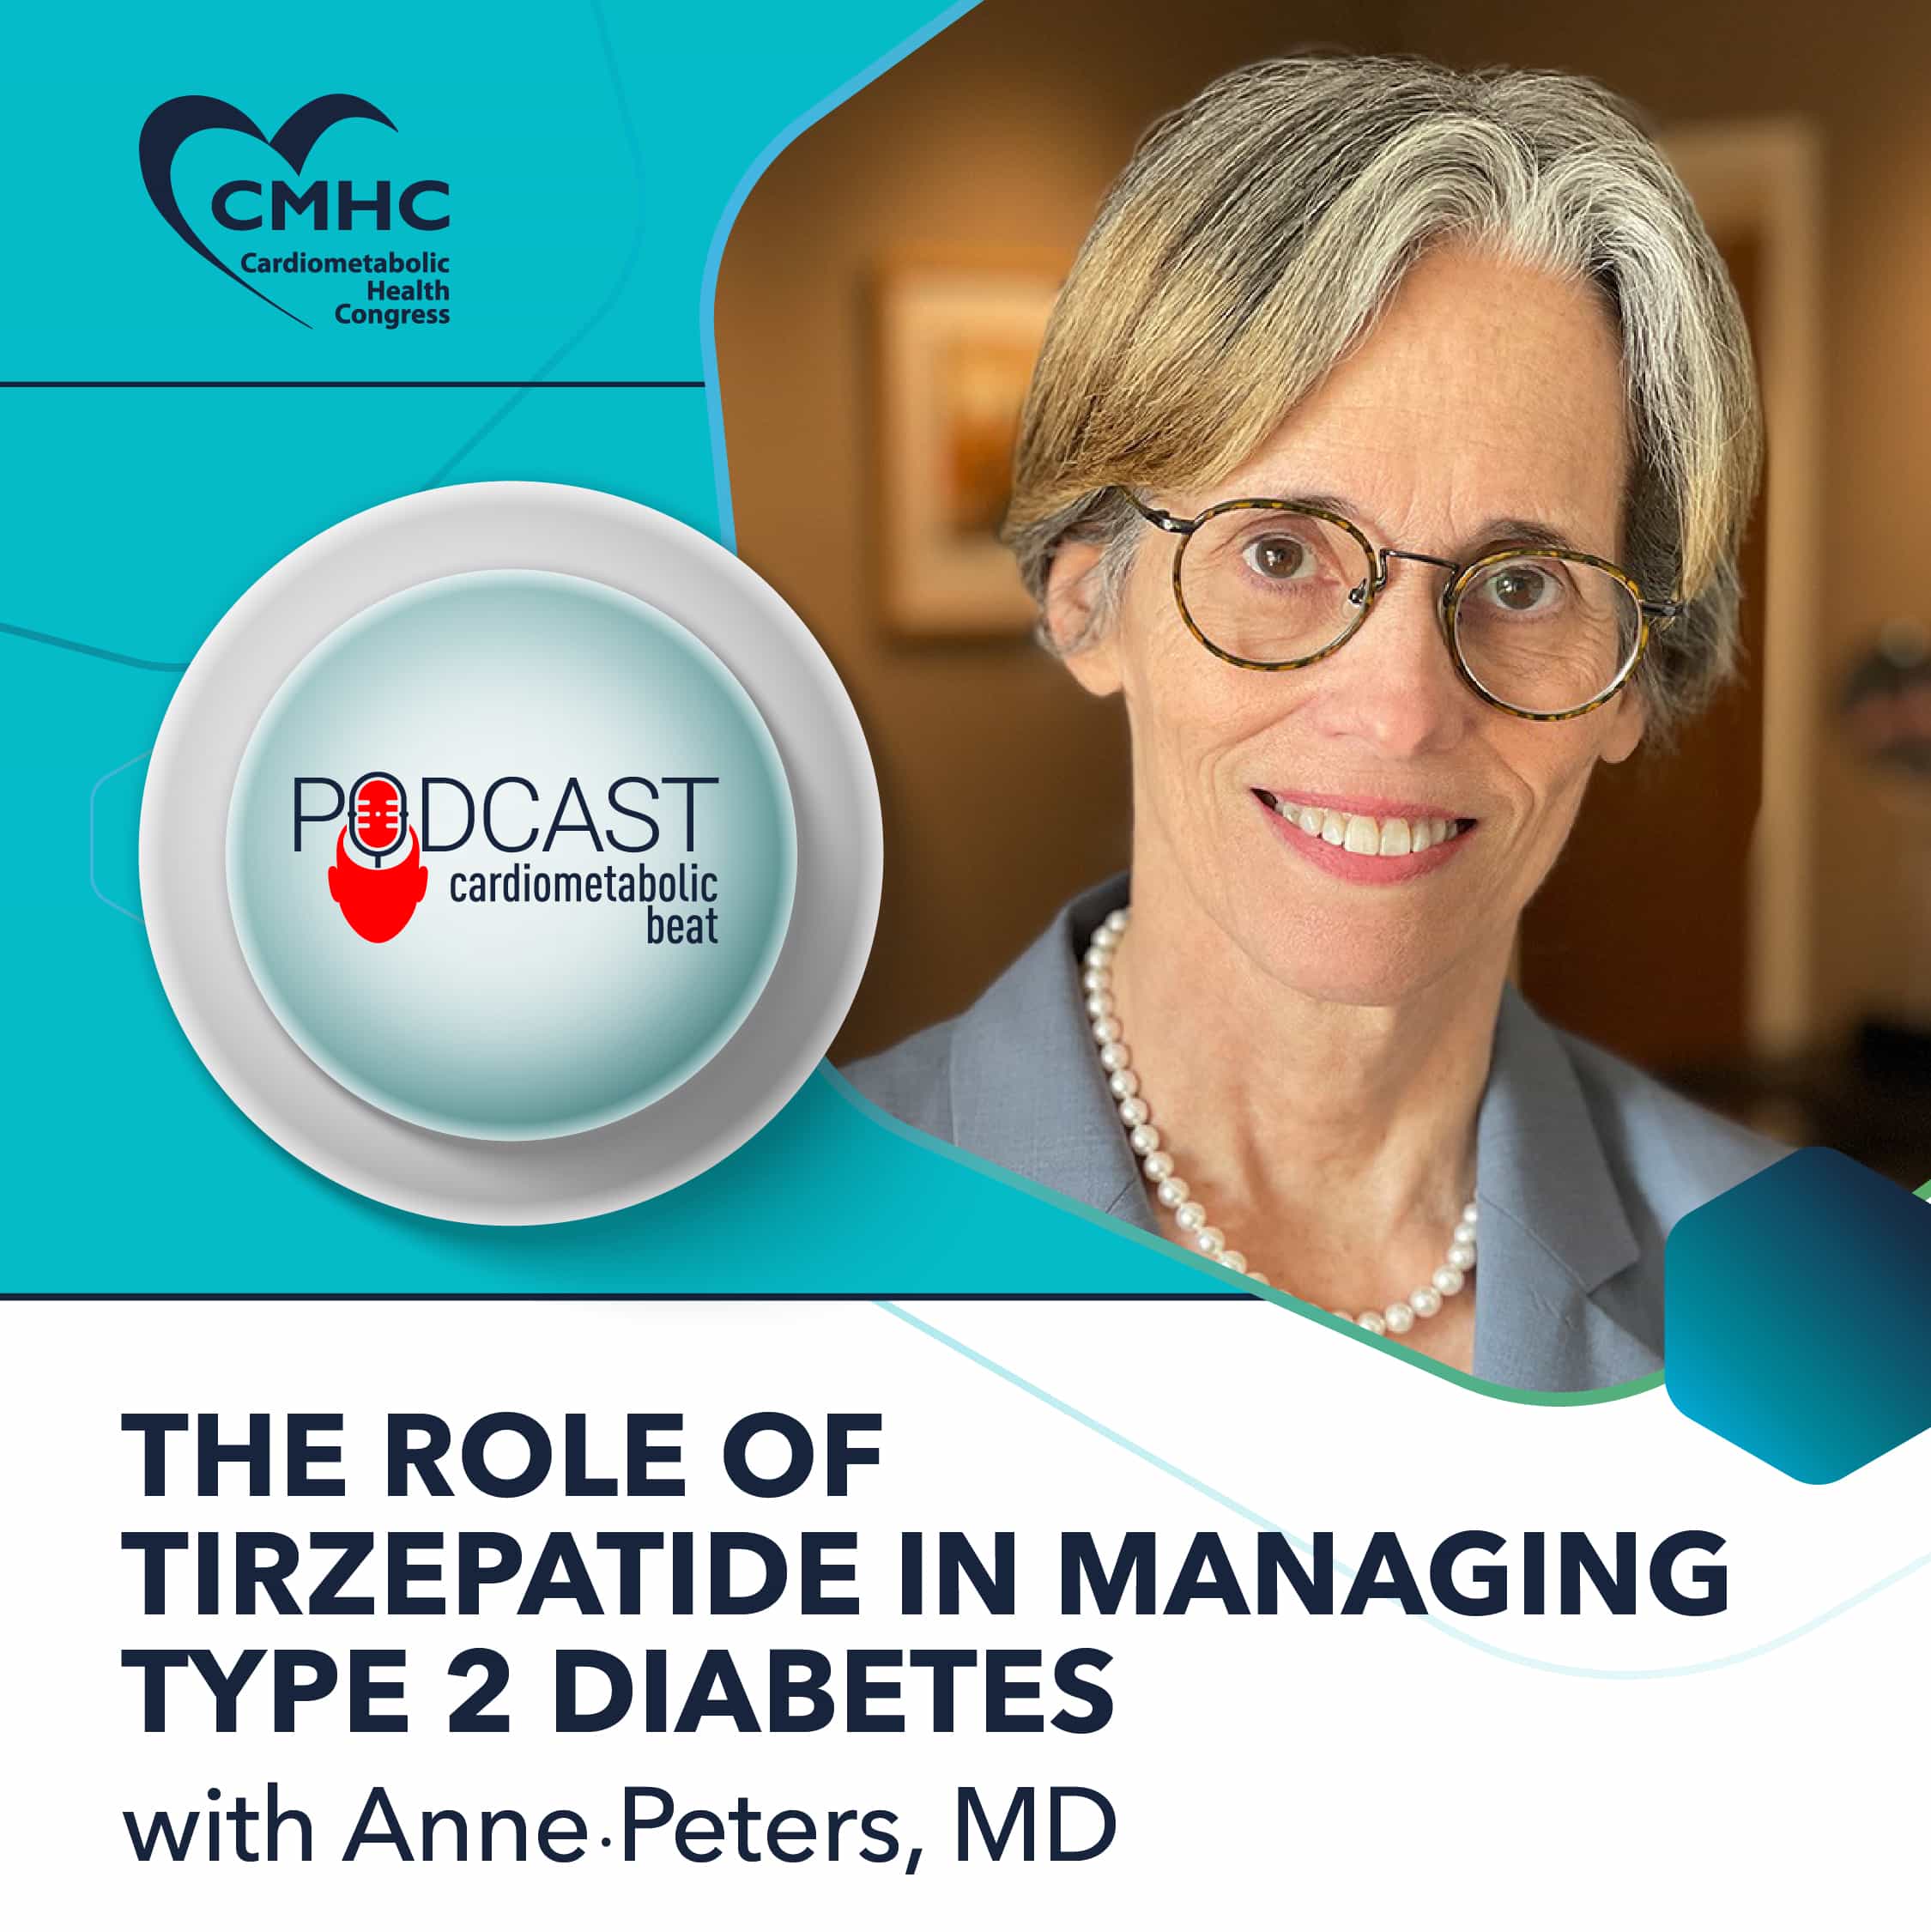 The Role of Tirzepatide in Managing Type 2 Diabetes with Anne Peters, MD